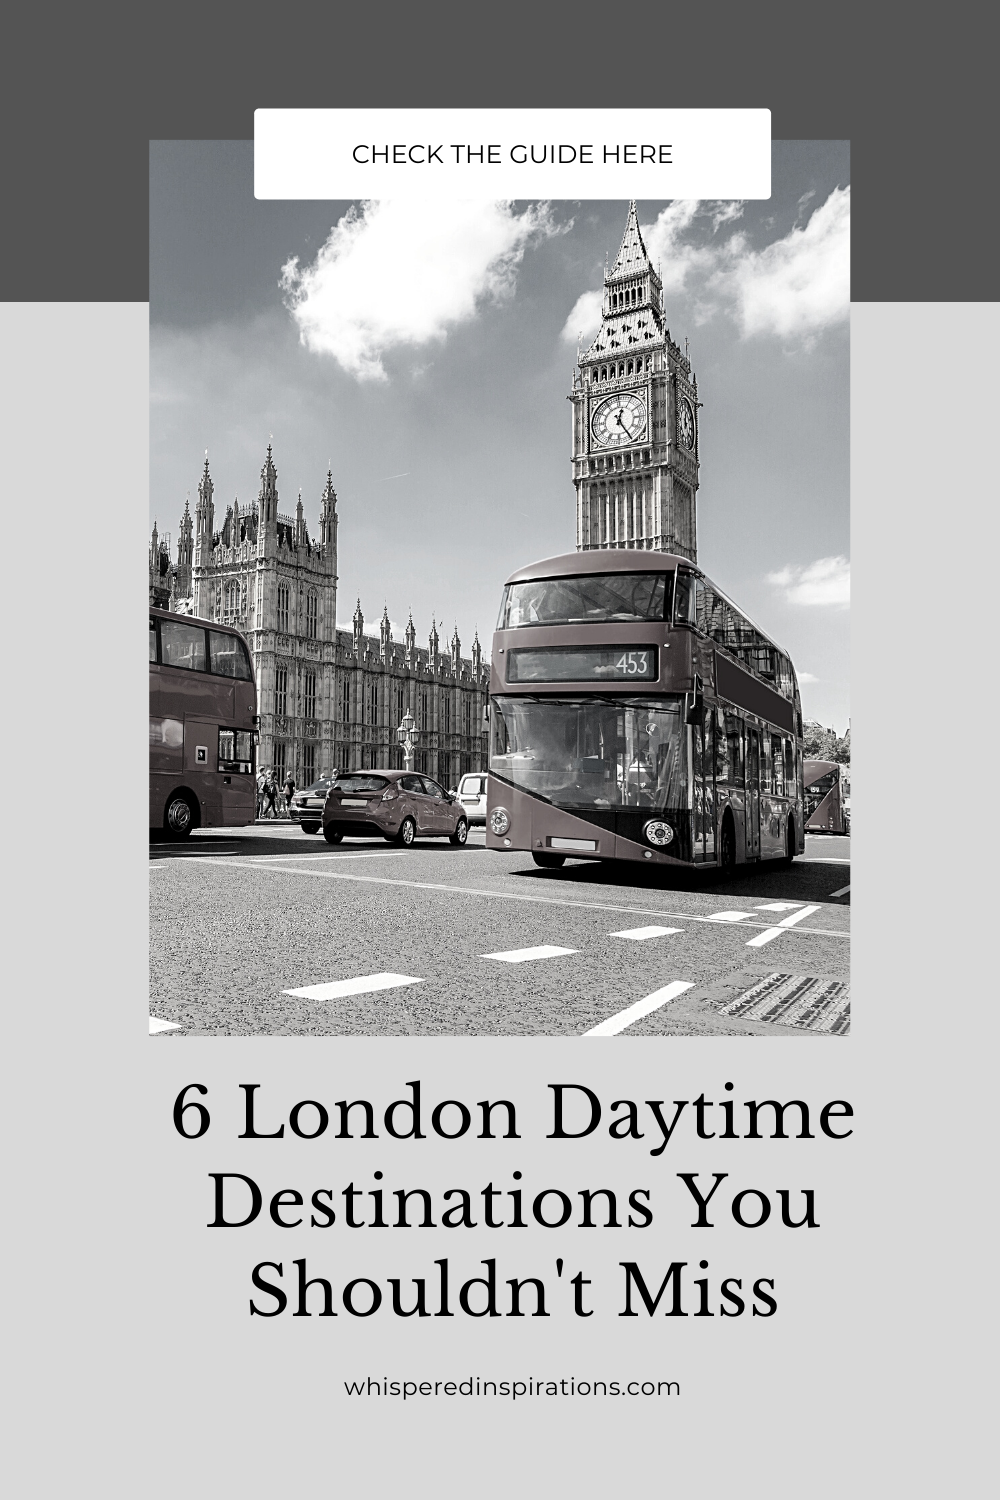 A traditional London, England double decker bus is shown in front of Big Ben. This article covers 6 London daytime destinations you shouldn't miss.